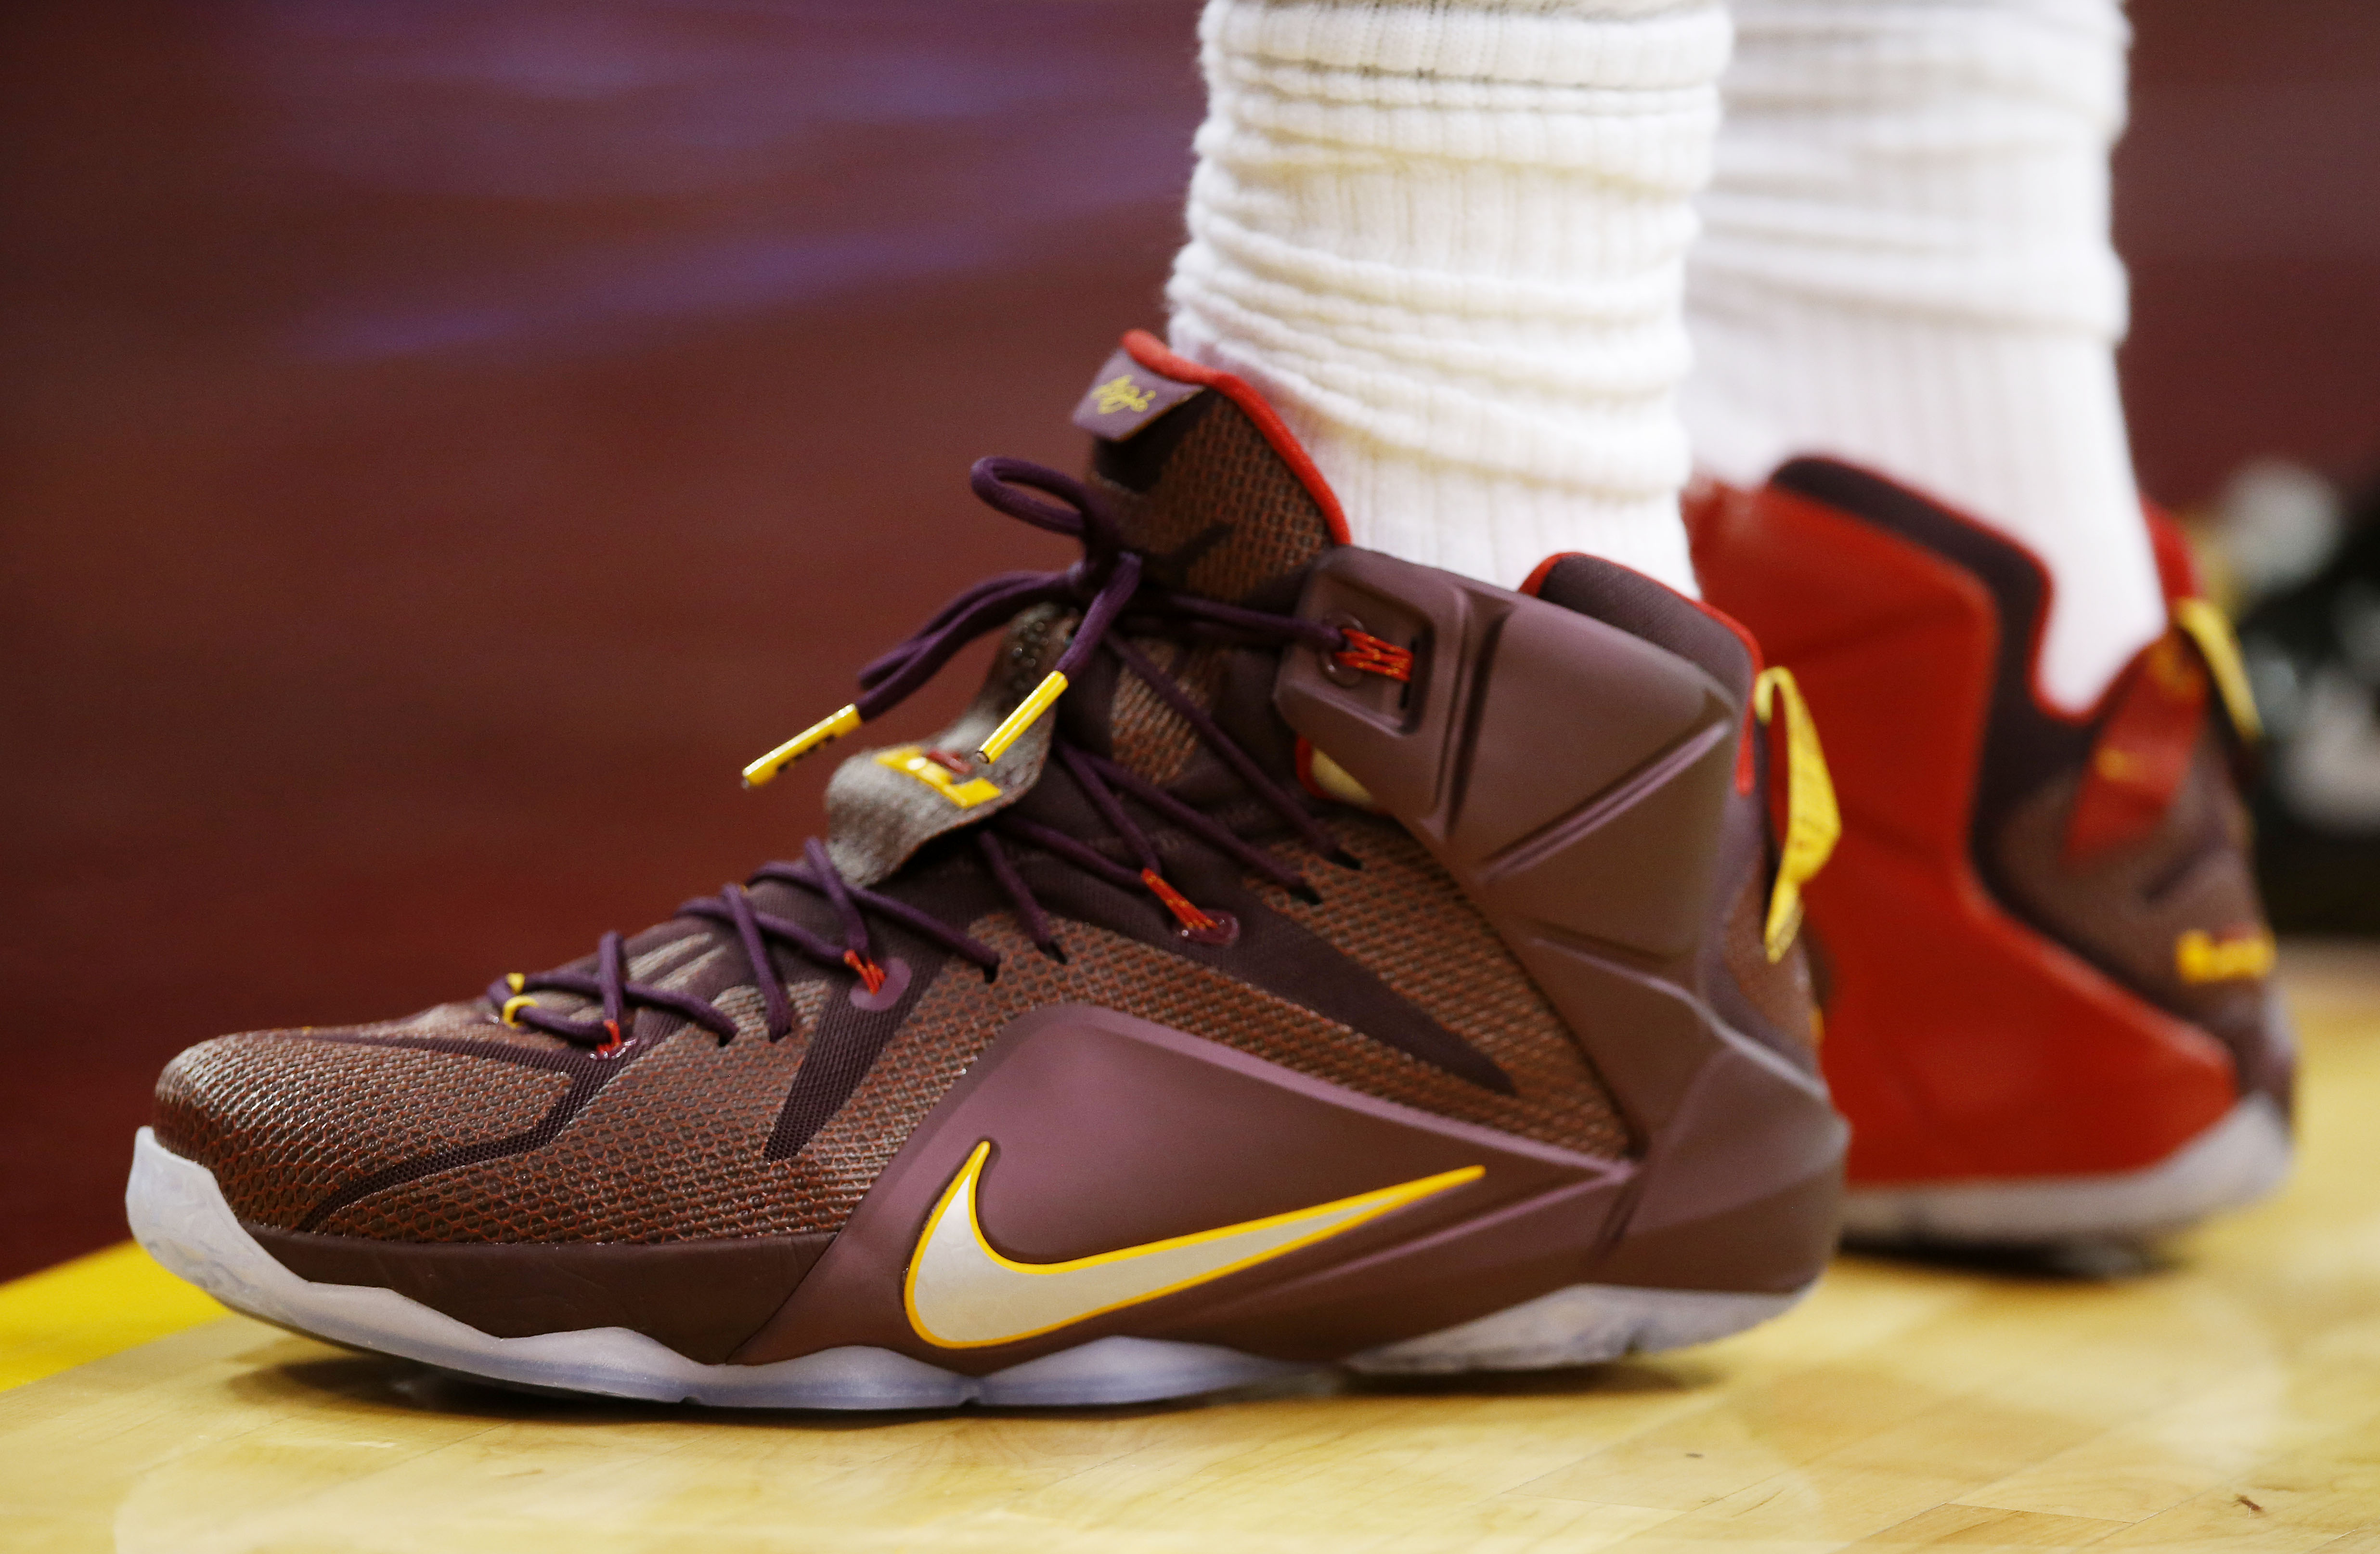 Lebron James Shoes: 5 Fast Facts You Need to Know – Heavy.com